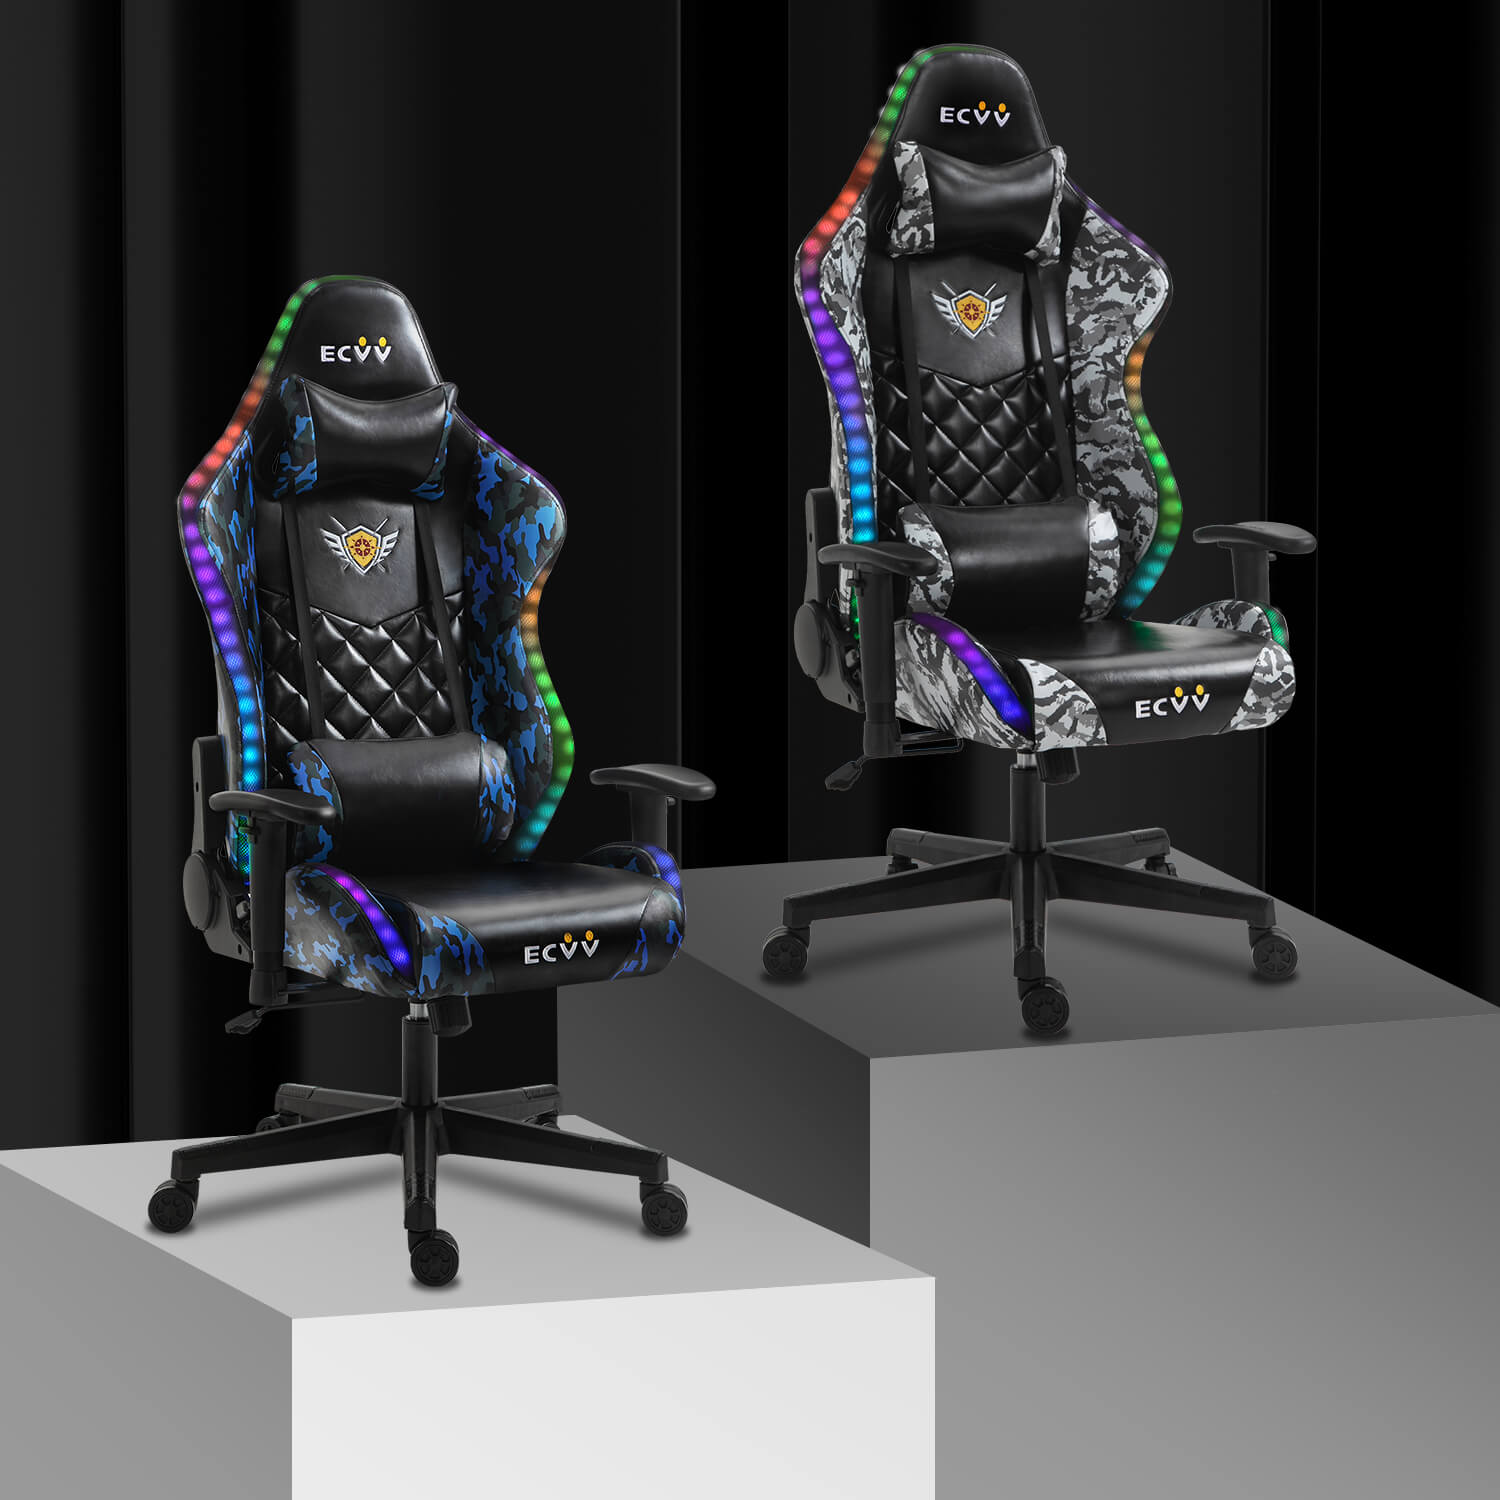 ECVV Gaming Chairs with RGB LED Adjustable Reclining Back Oil-waxed Leather Oversized Design Rocking Chair Suitable for Gamers Game Anchors